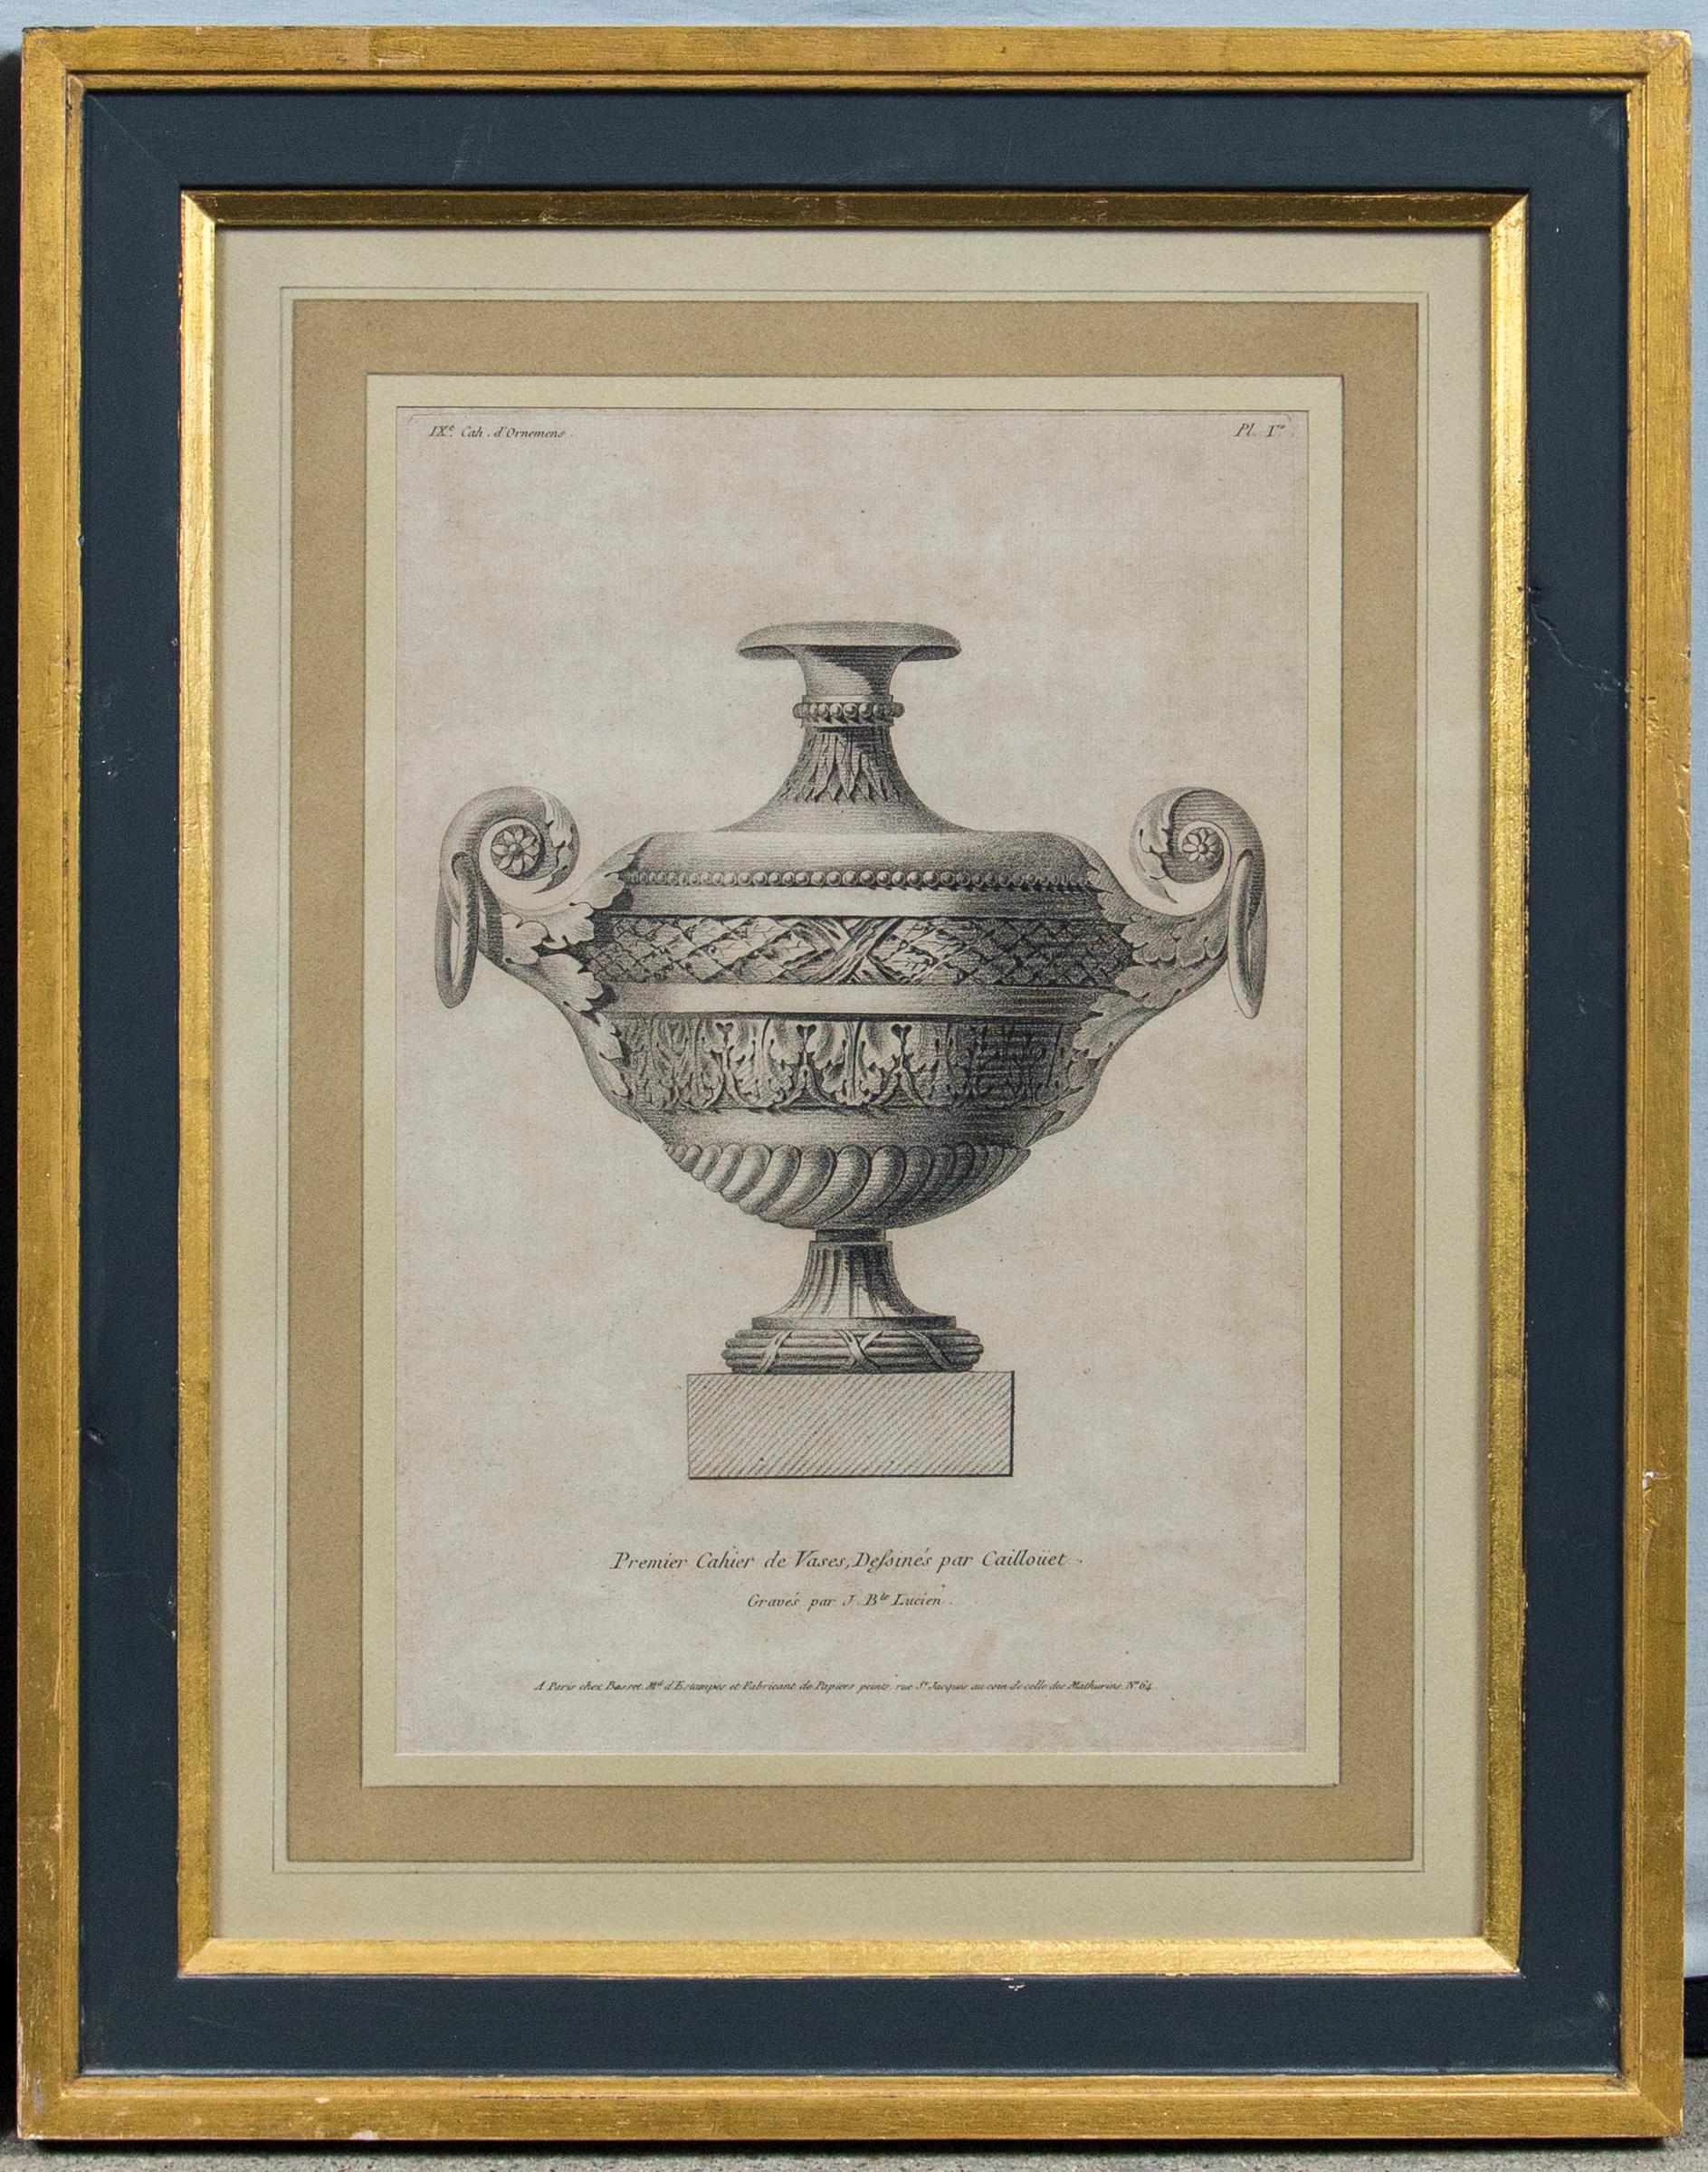 Set of 4 'Vase' Engravings by Andre-Louis Caillouet, France, Late 18th Century 4